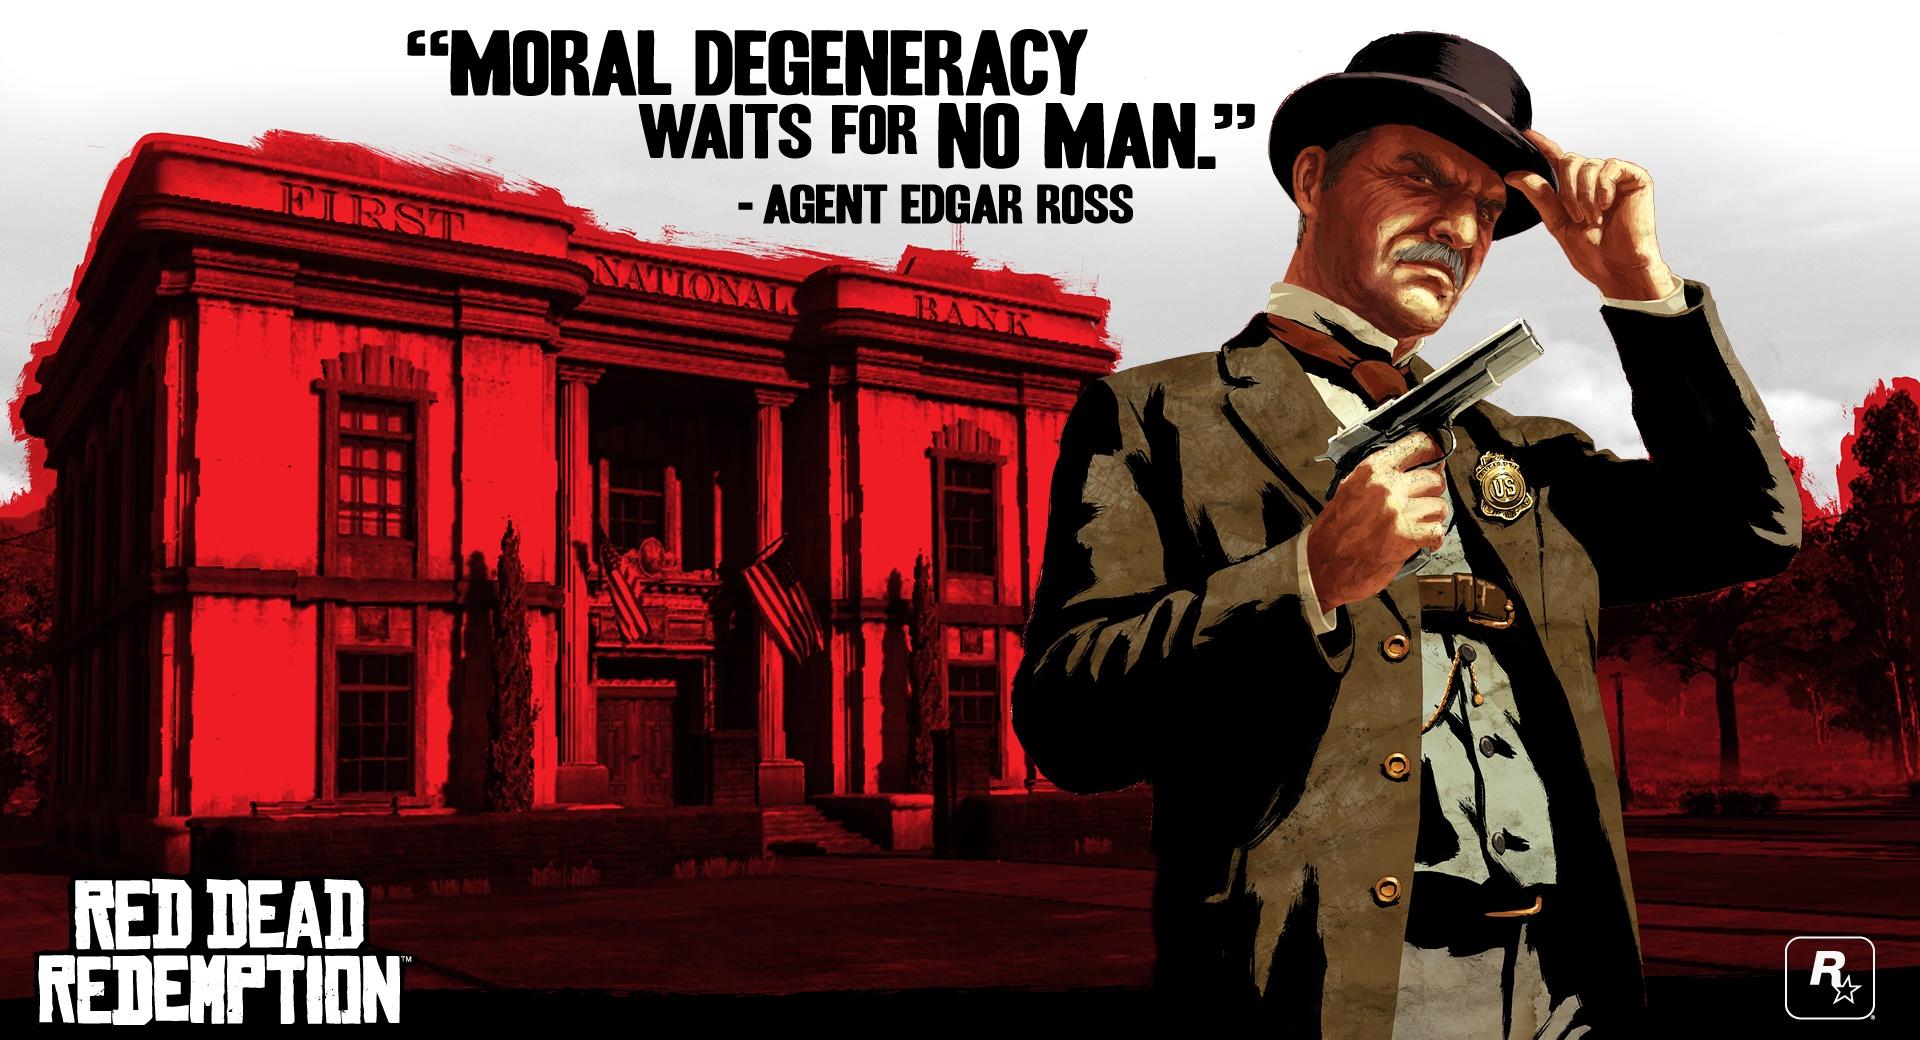 Red Dead Redemption, Agent Edgar Ross wallpapers HD quality